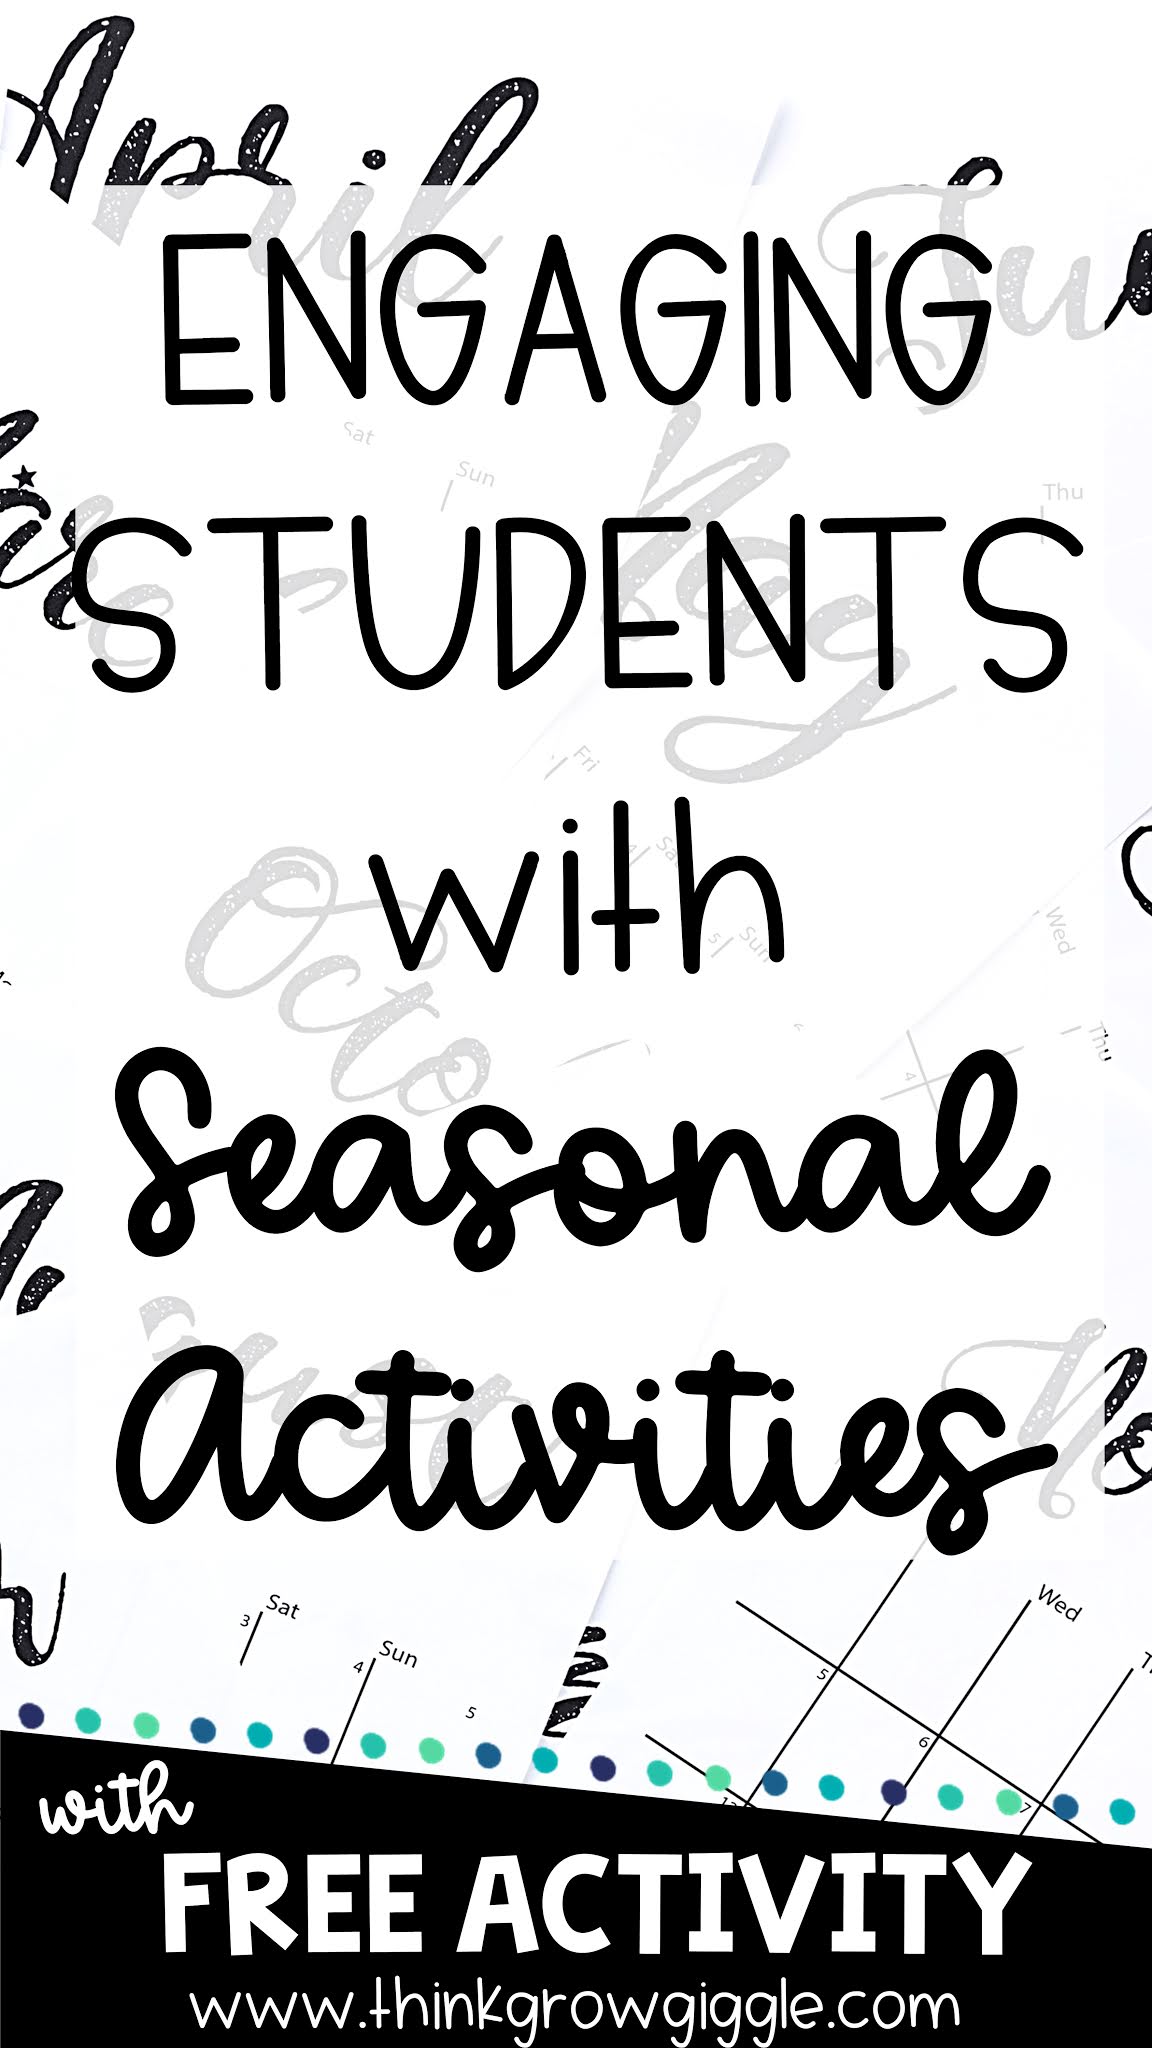 3 Simple Ways to Engage Students By Teaching With Seasonal and Holiday Activities